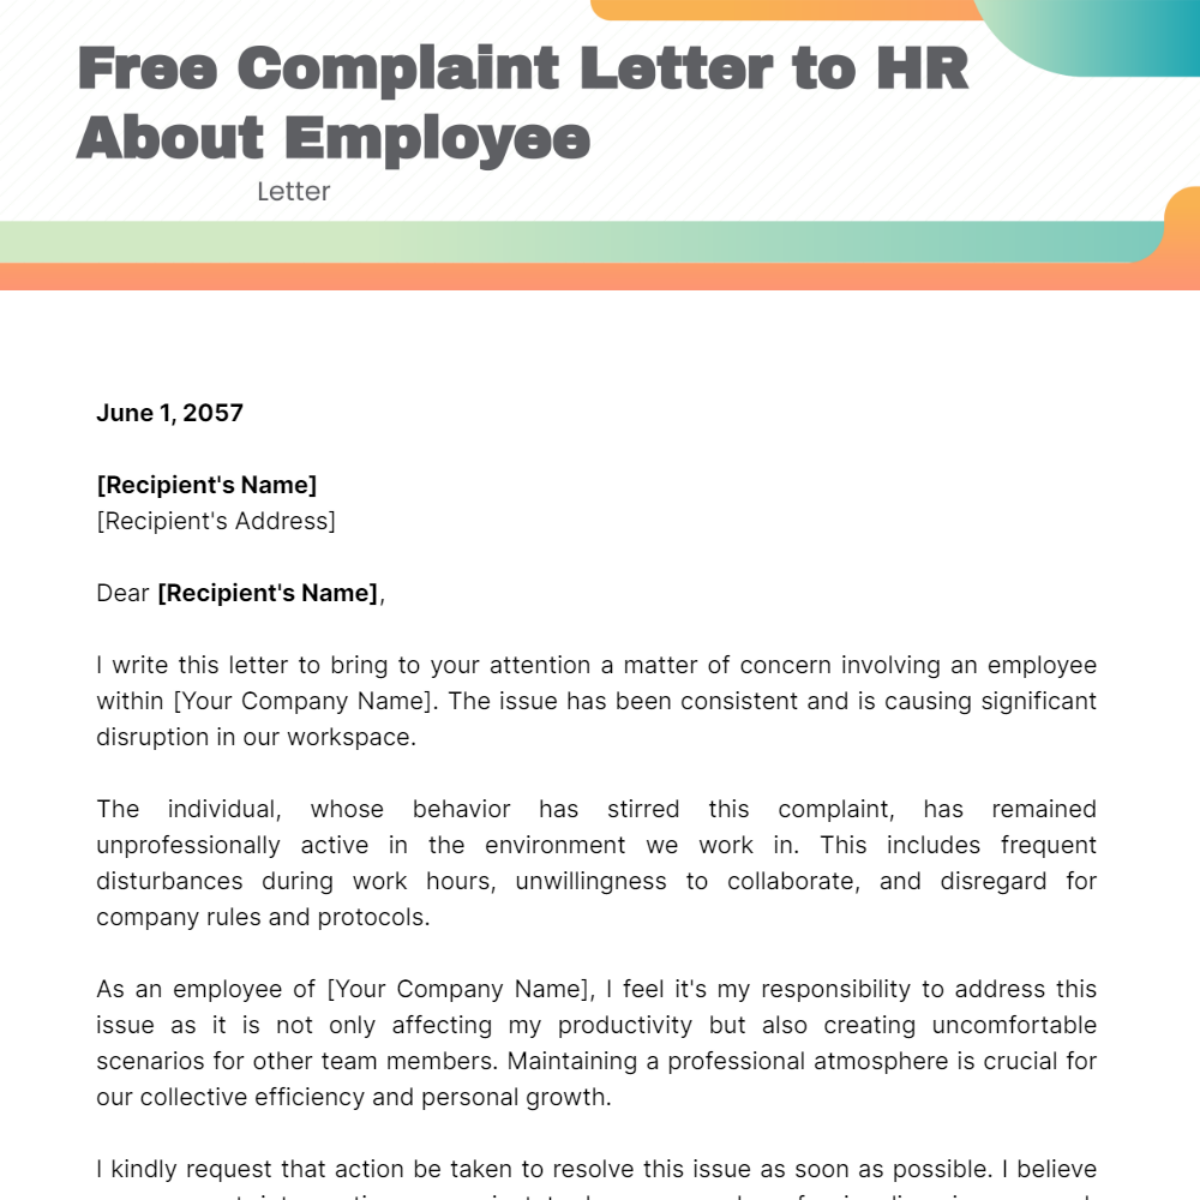 Complaint Letter to HR About Employee Template